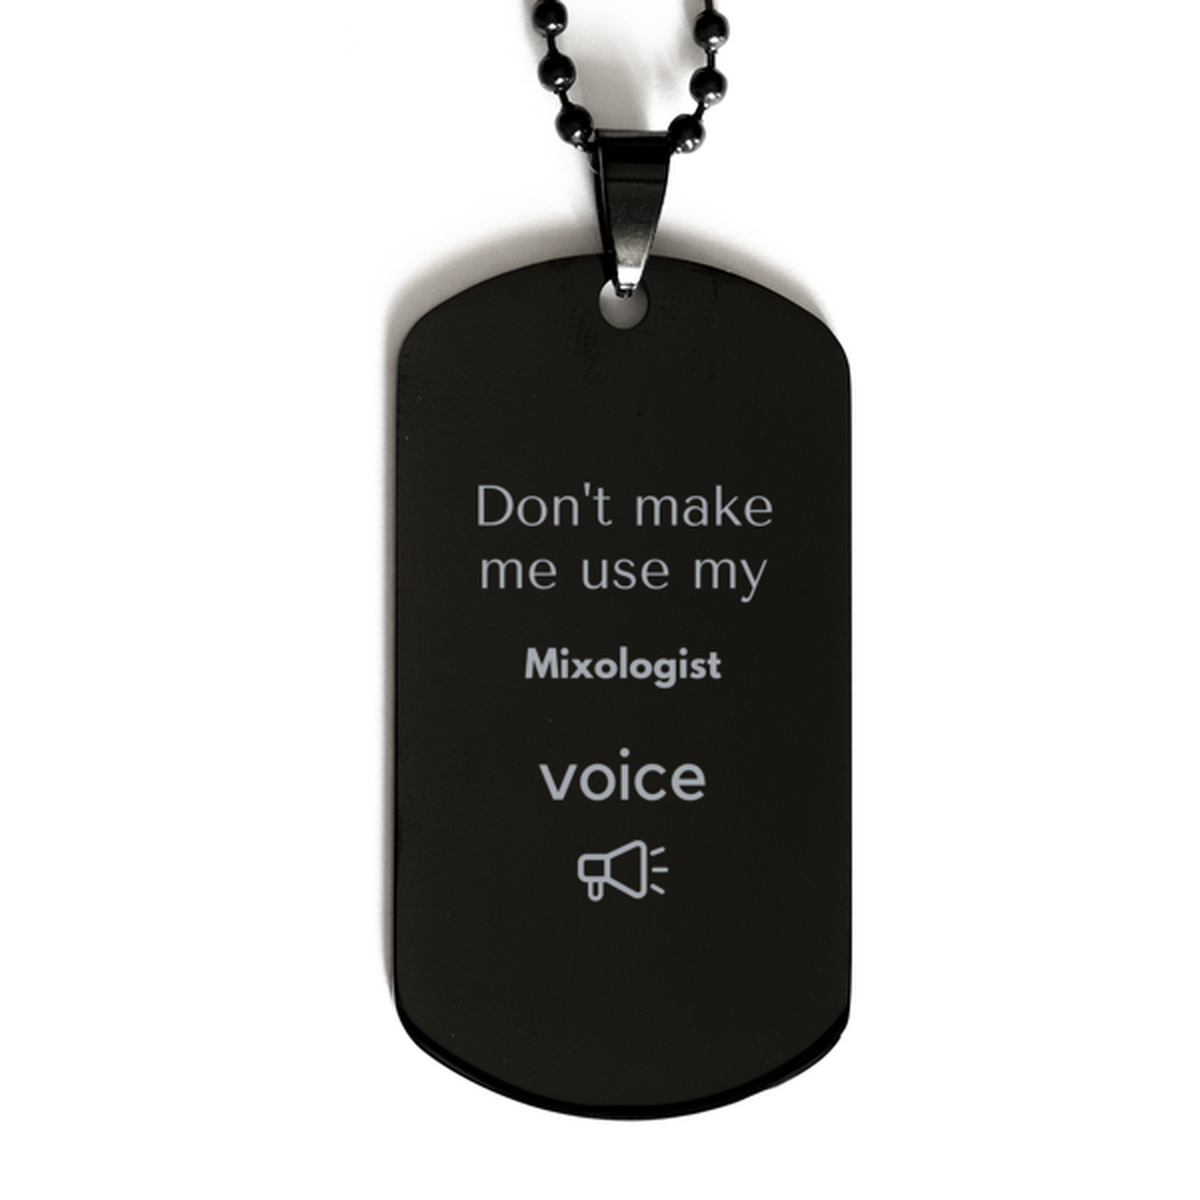 Don't make me use my Mixologist voice, Sarcasm Mixologist Gifts, Christmas Mixologist Black Dog Tag Birthday Unique Gifts For Mixologist Coworkers, Men, Women, Colleague, Friends